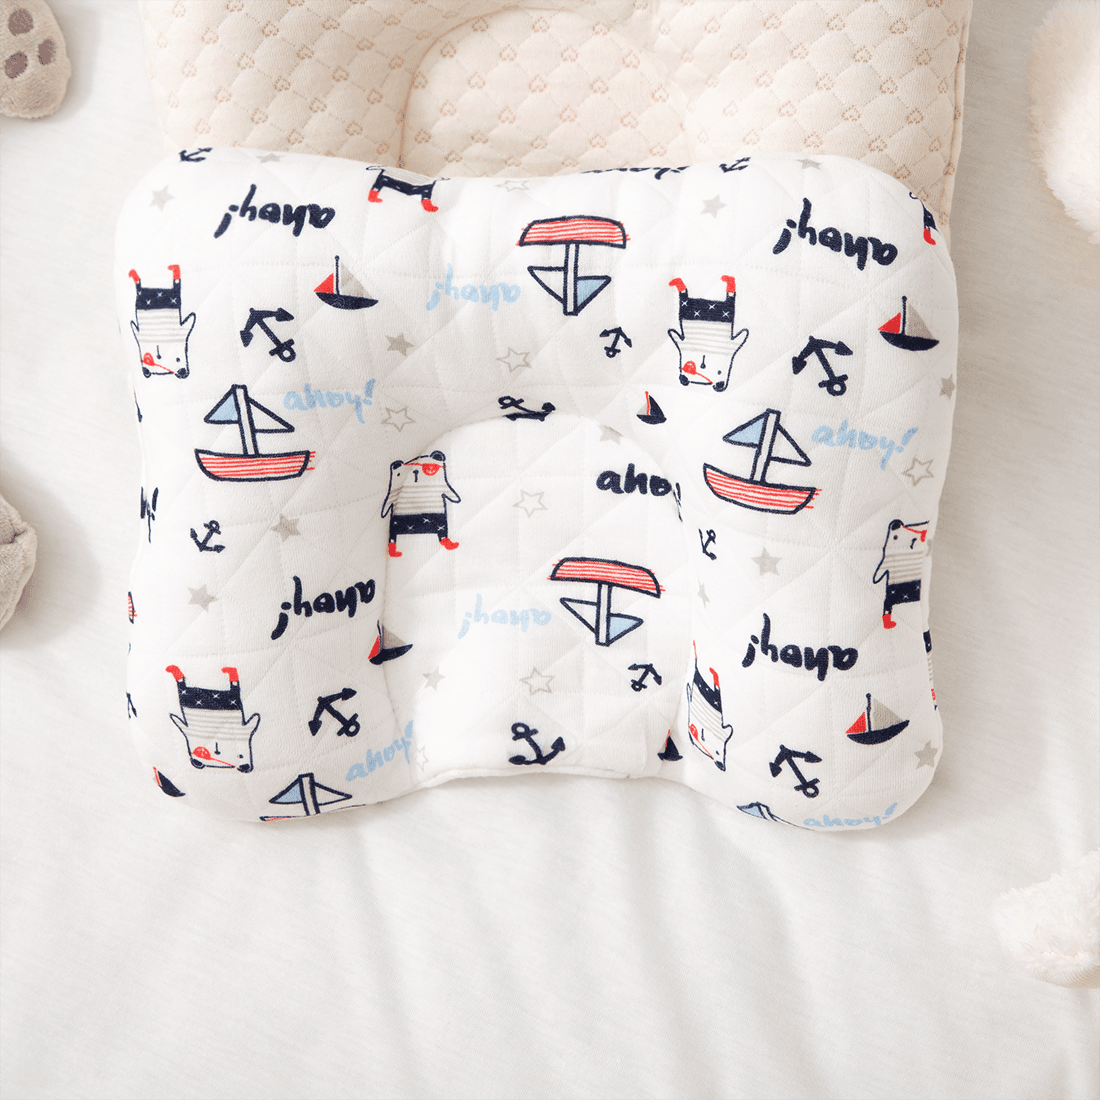 Baby 100% Colored Cotton Cute Cartoon Pillow Baby Head Shaping Pillow For Preventing Flat Head Syndrome